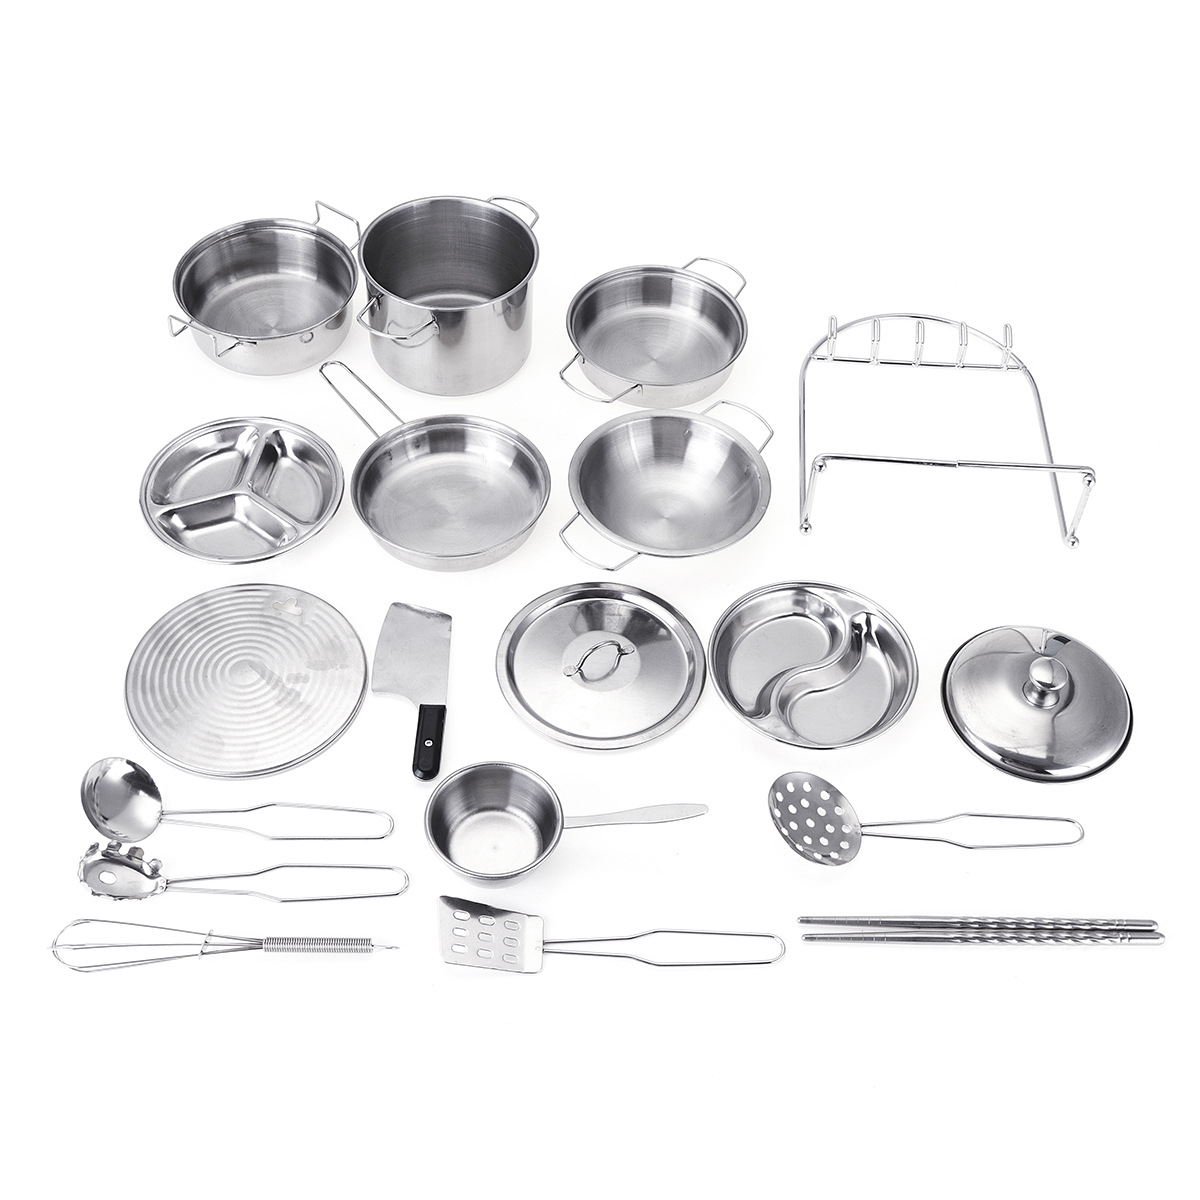 32PCS-Mini-Stainless-Steel-Kitchen-Cutlery-Play-House-Food-Toy-Boiler-Kettle-Cup-Bowl-Spoon-Cookware-1423237-8